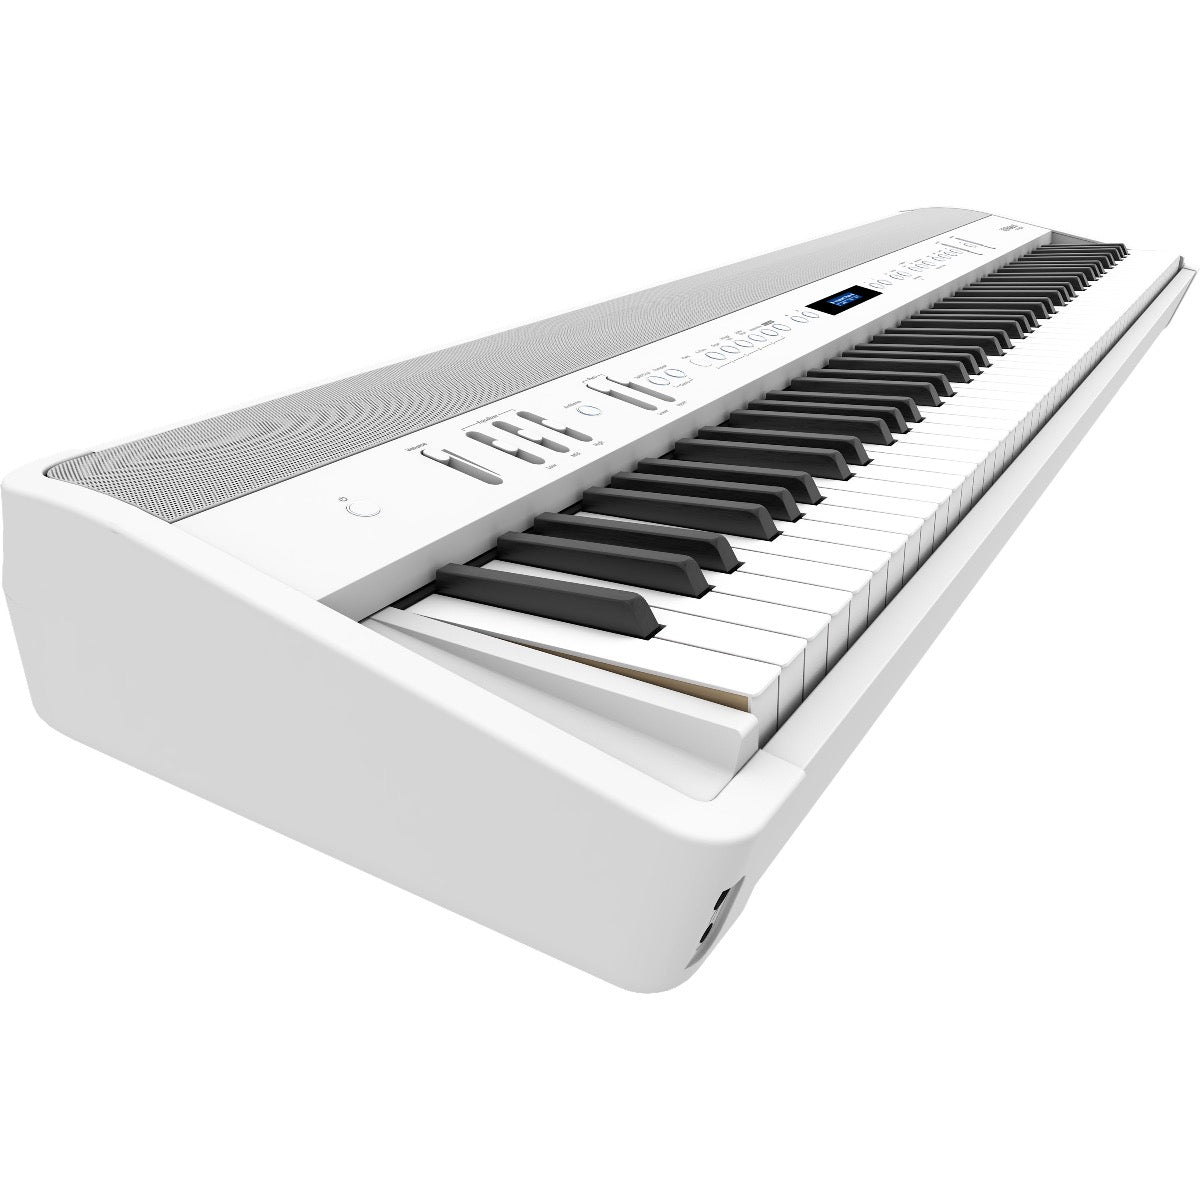 3/4 view of Roland FP-90X Digital Piano - White showing left side, top and front